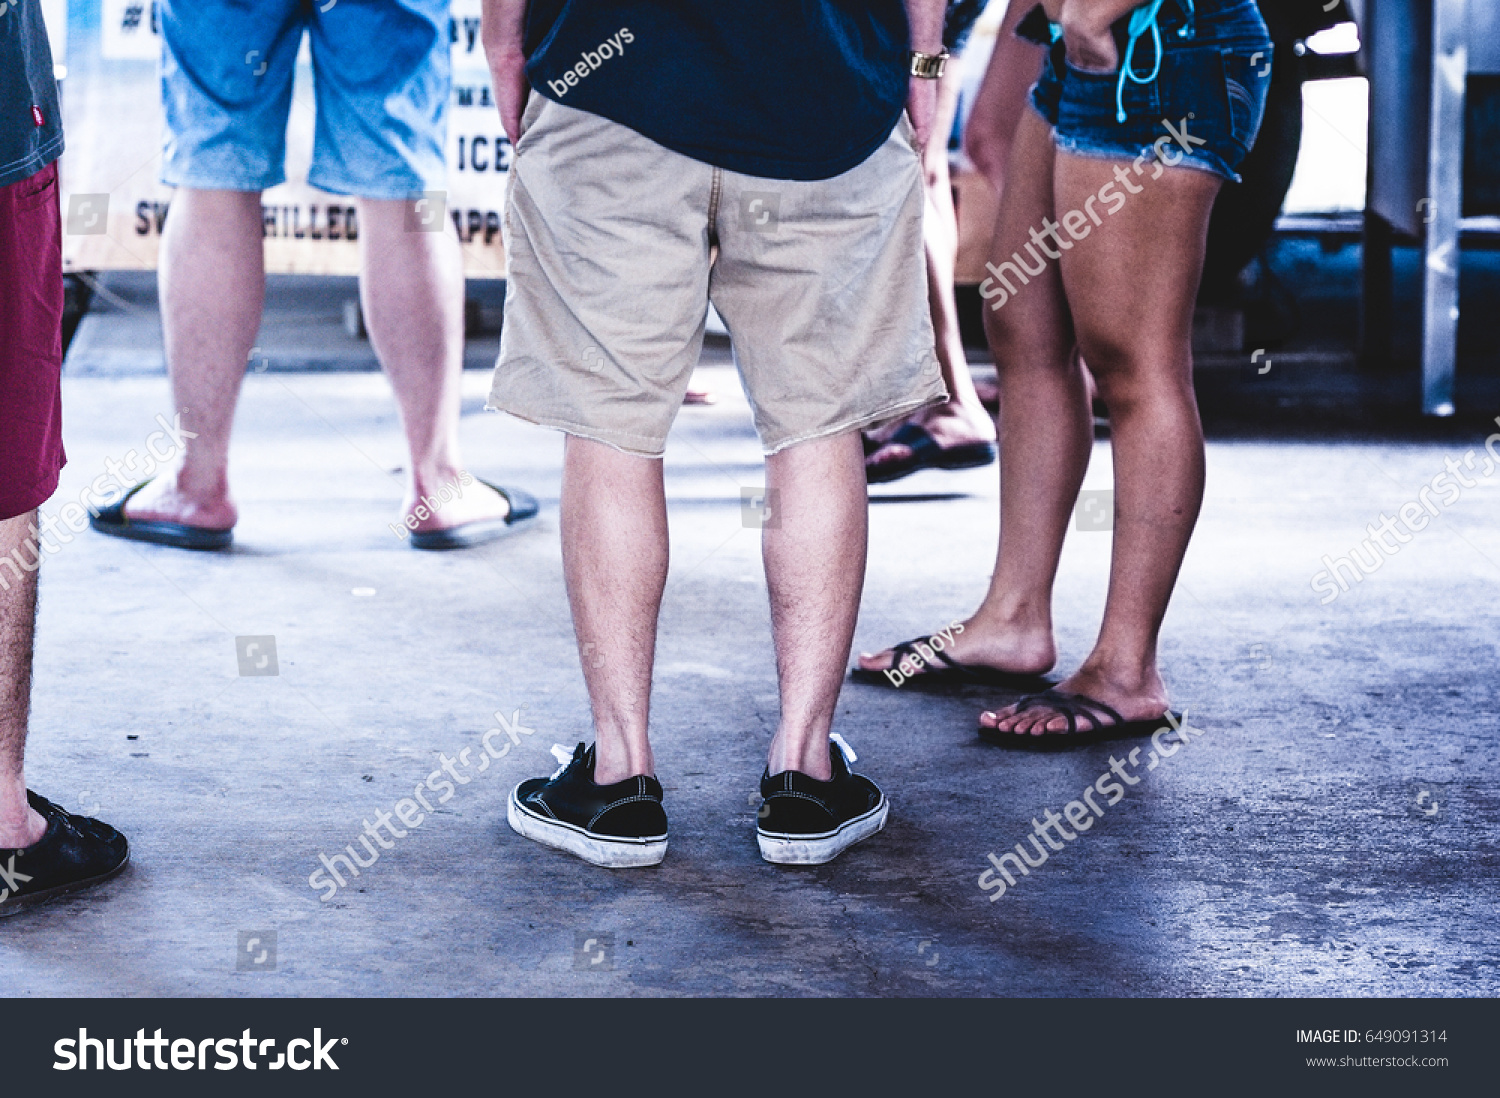 Peoples Feet Body Parts Stock Photo 649091314 | Shutterstock